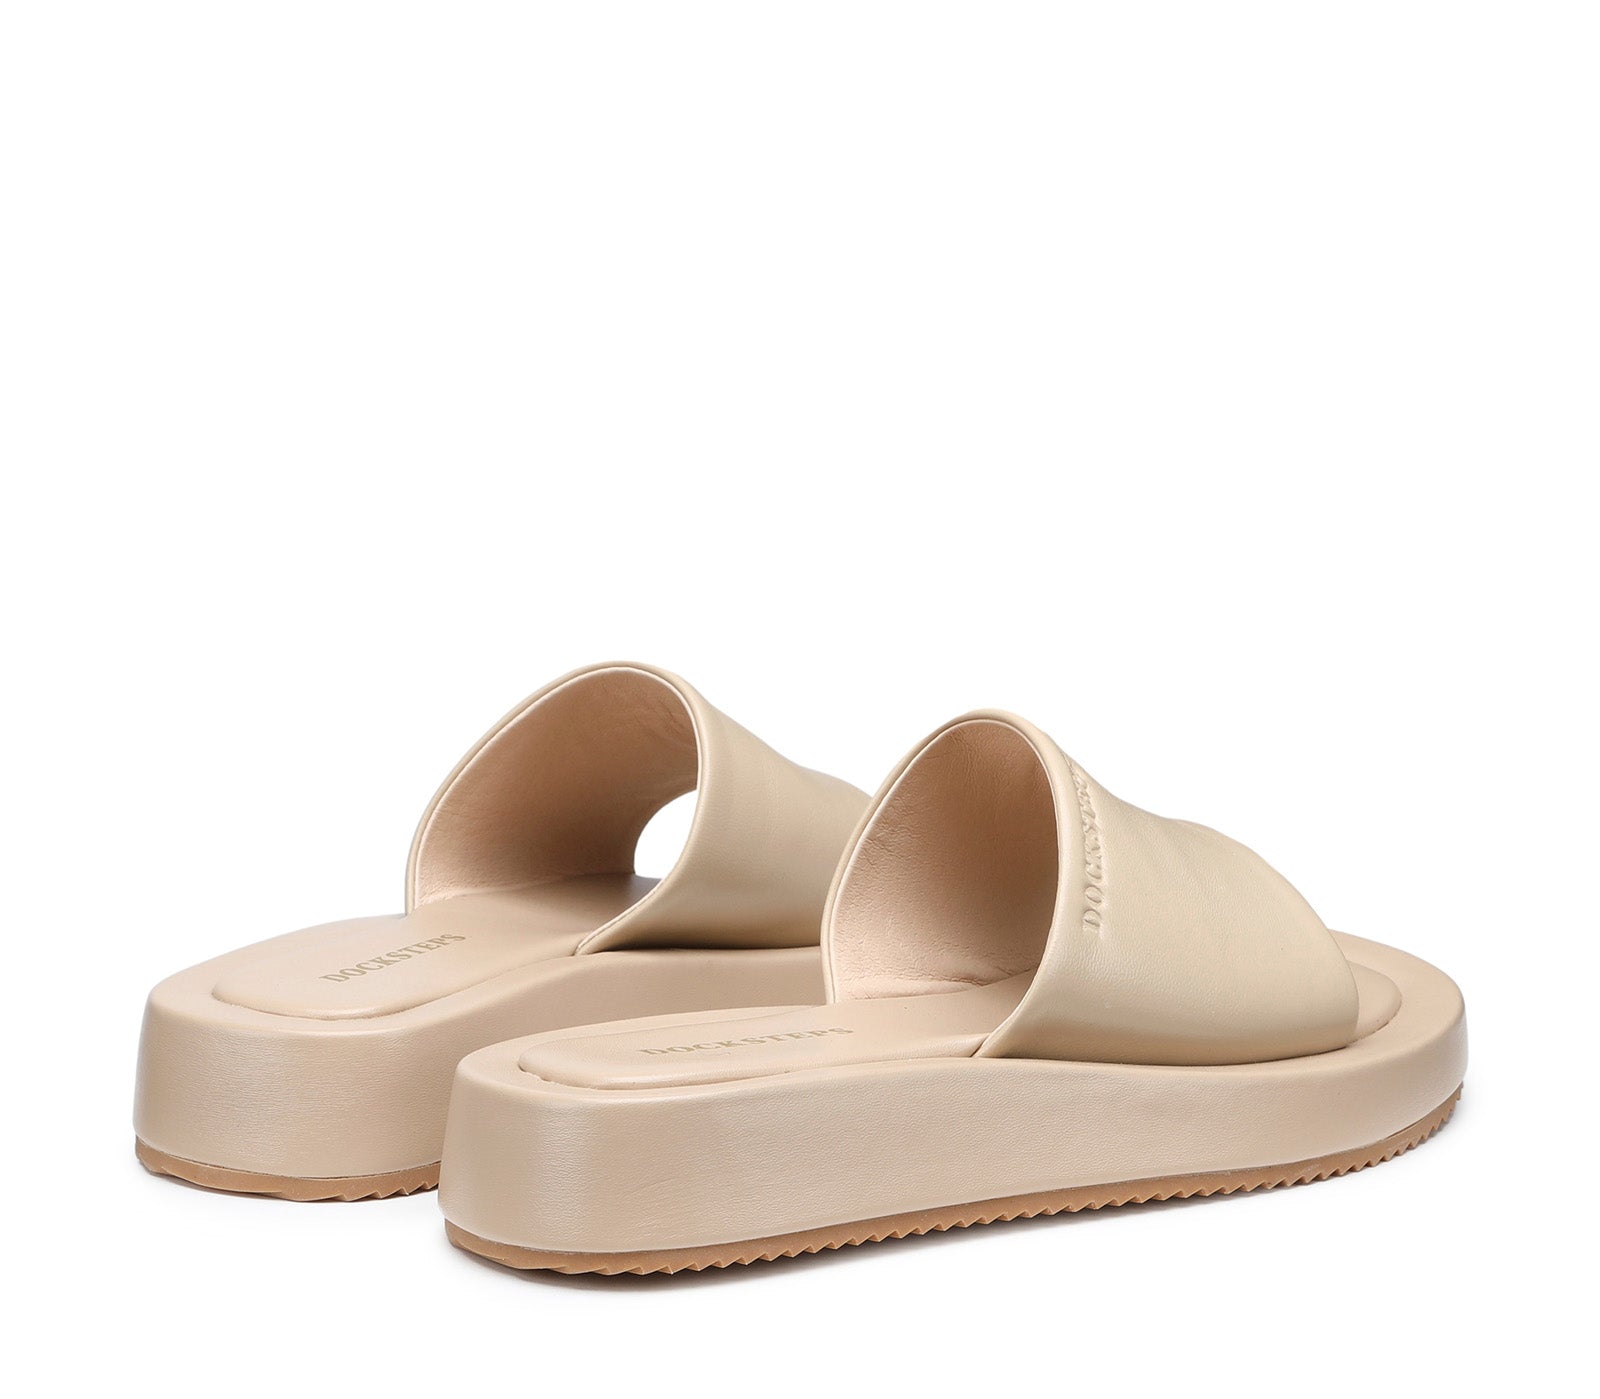 Women's Taupe Sandals with Maxi Band and Mid-Platform Sole 